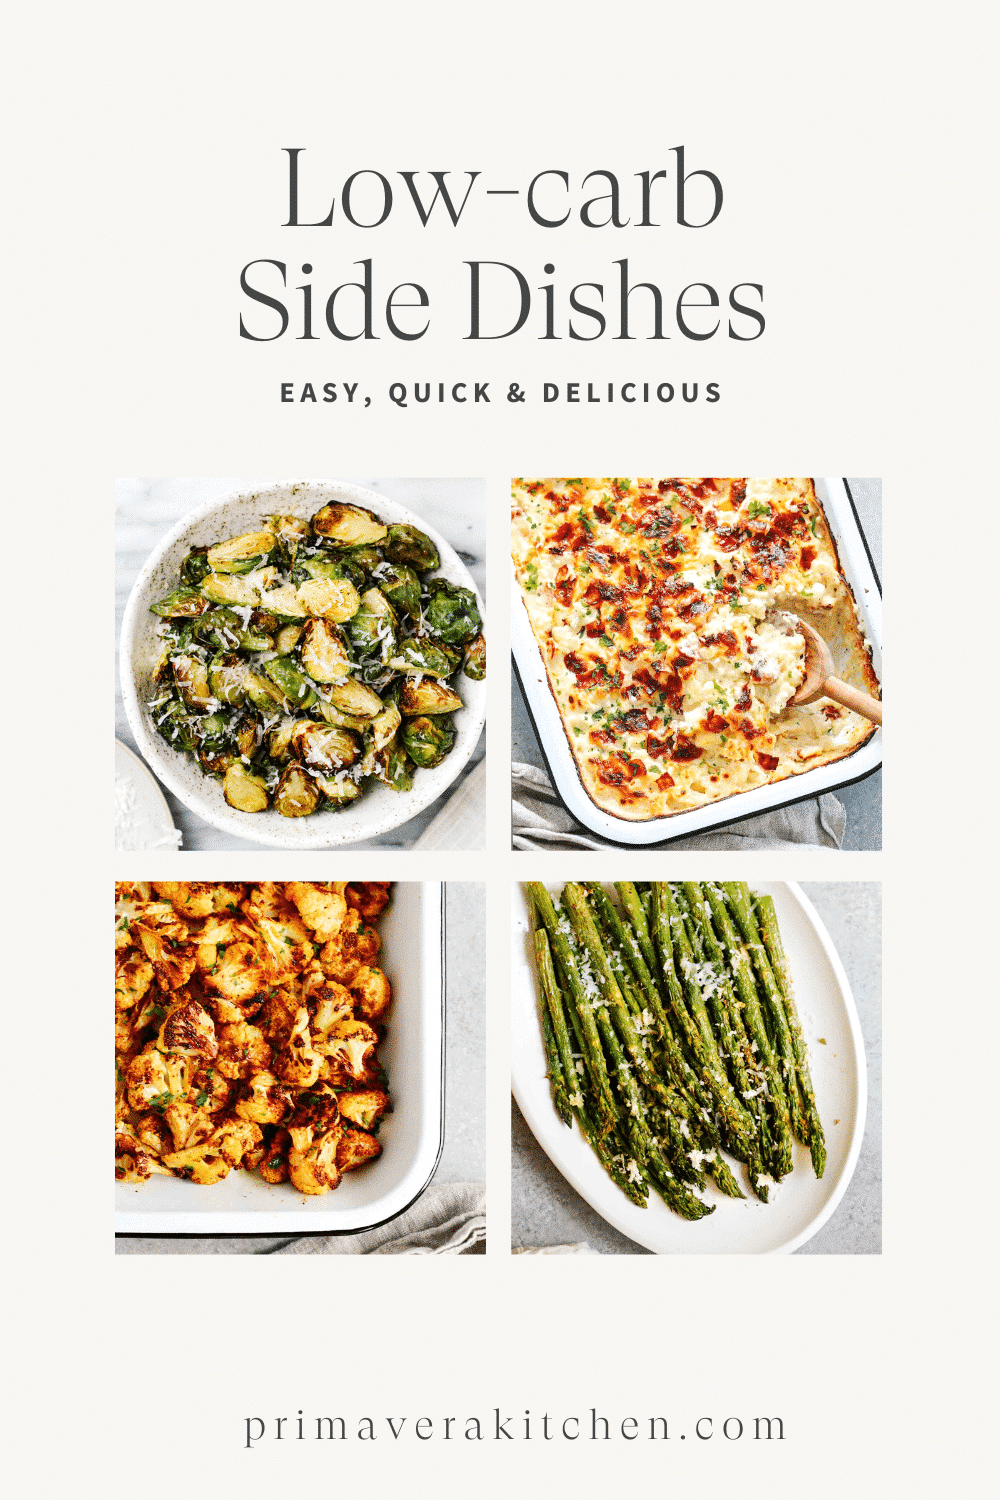 collage of side dish recipes photos with a text that says "low carb side dish recipes"